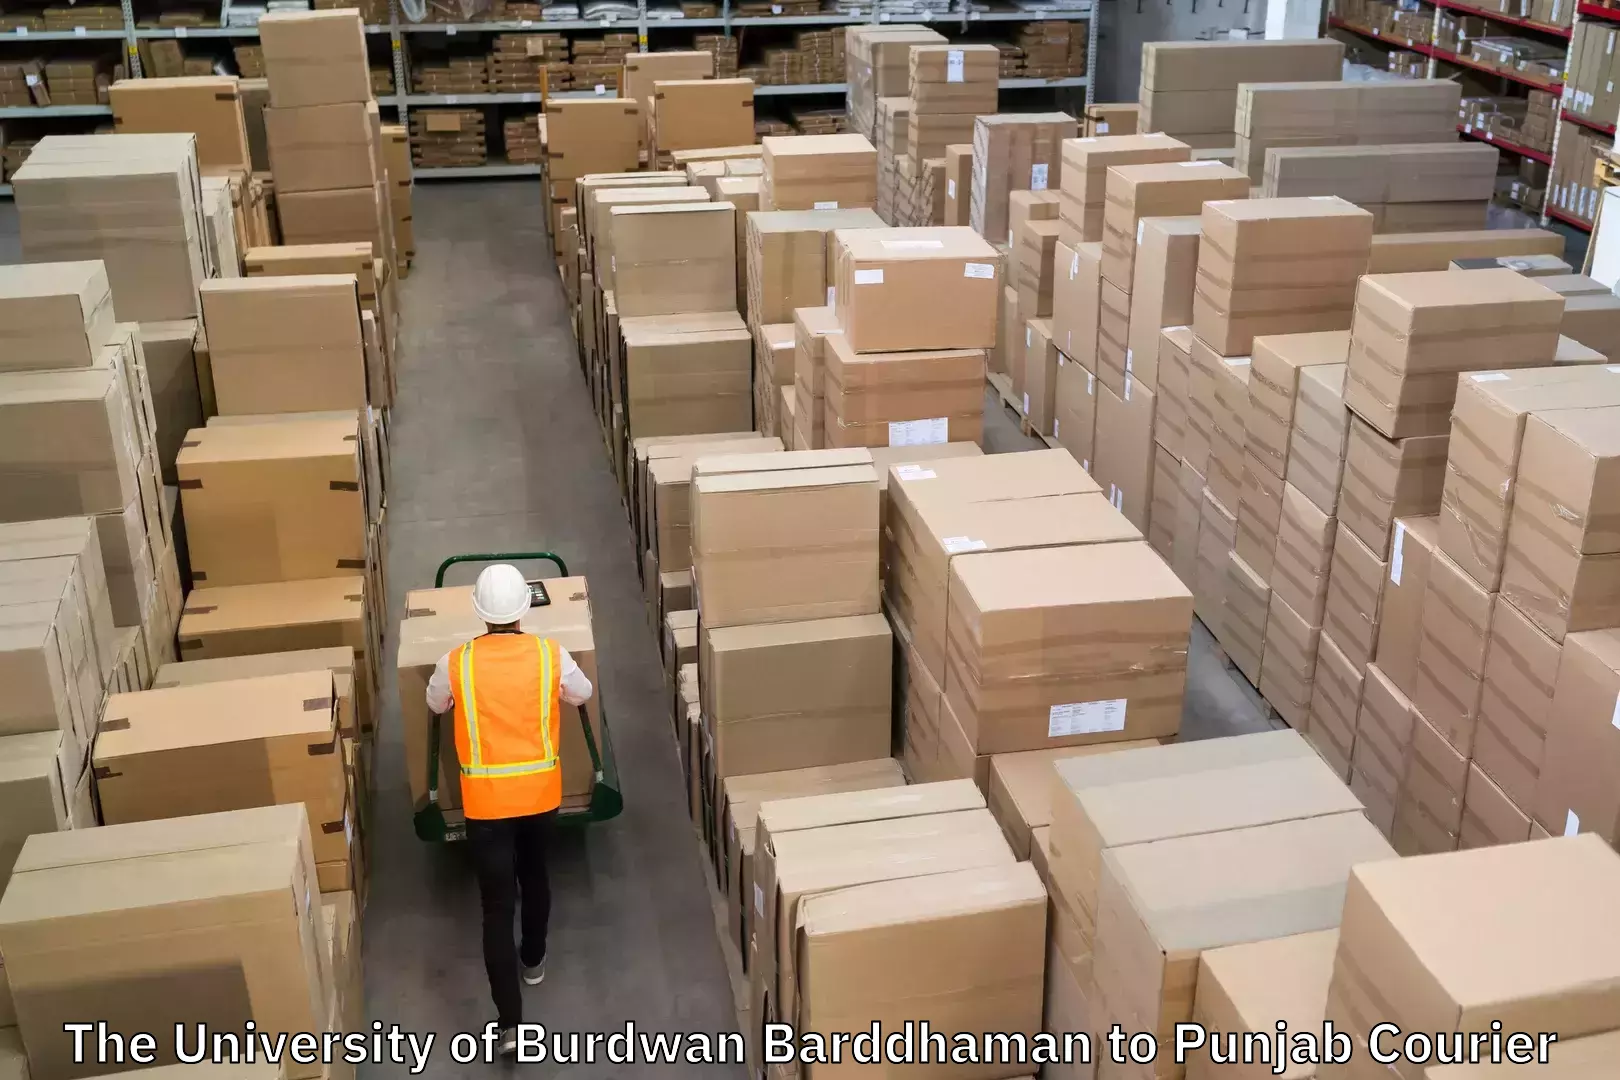 Parcel delivery automation The University of Burdwan Barddhaman to Punjab